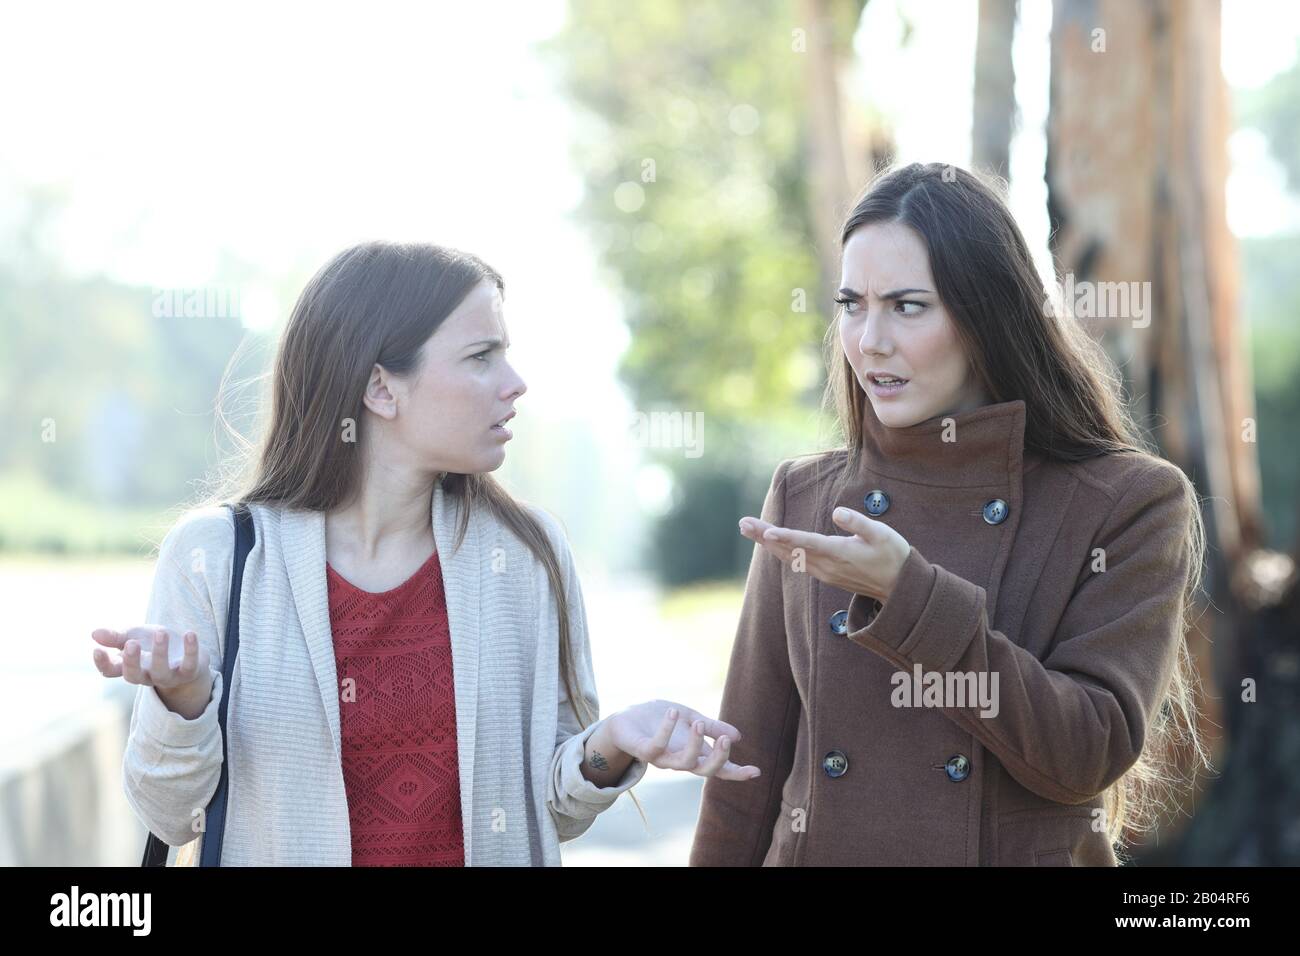 Front view portrait of two angry women arguing in a park in winter Stock Photo